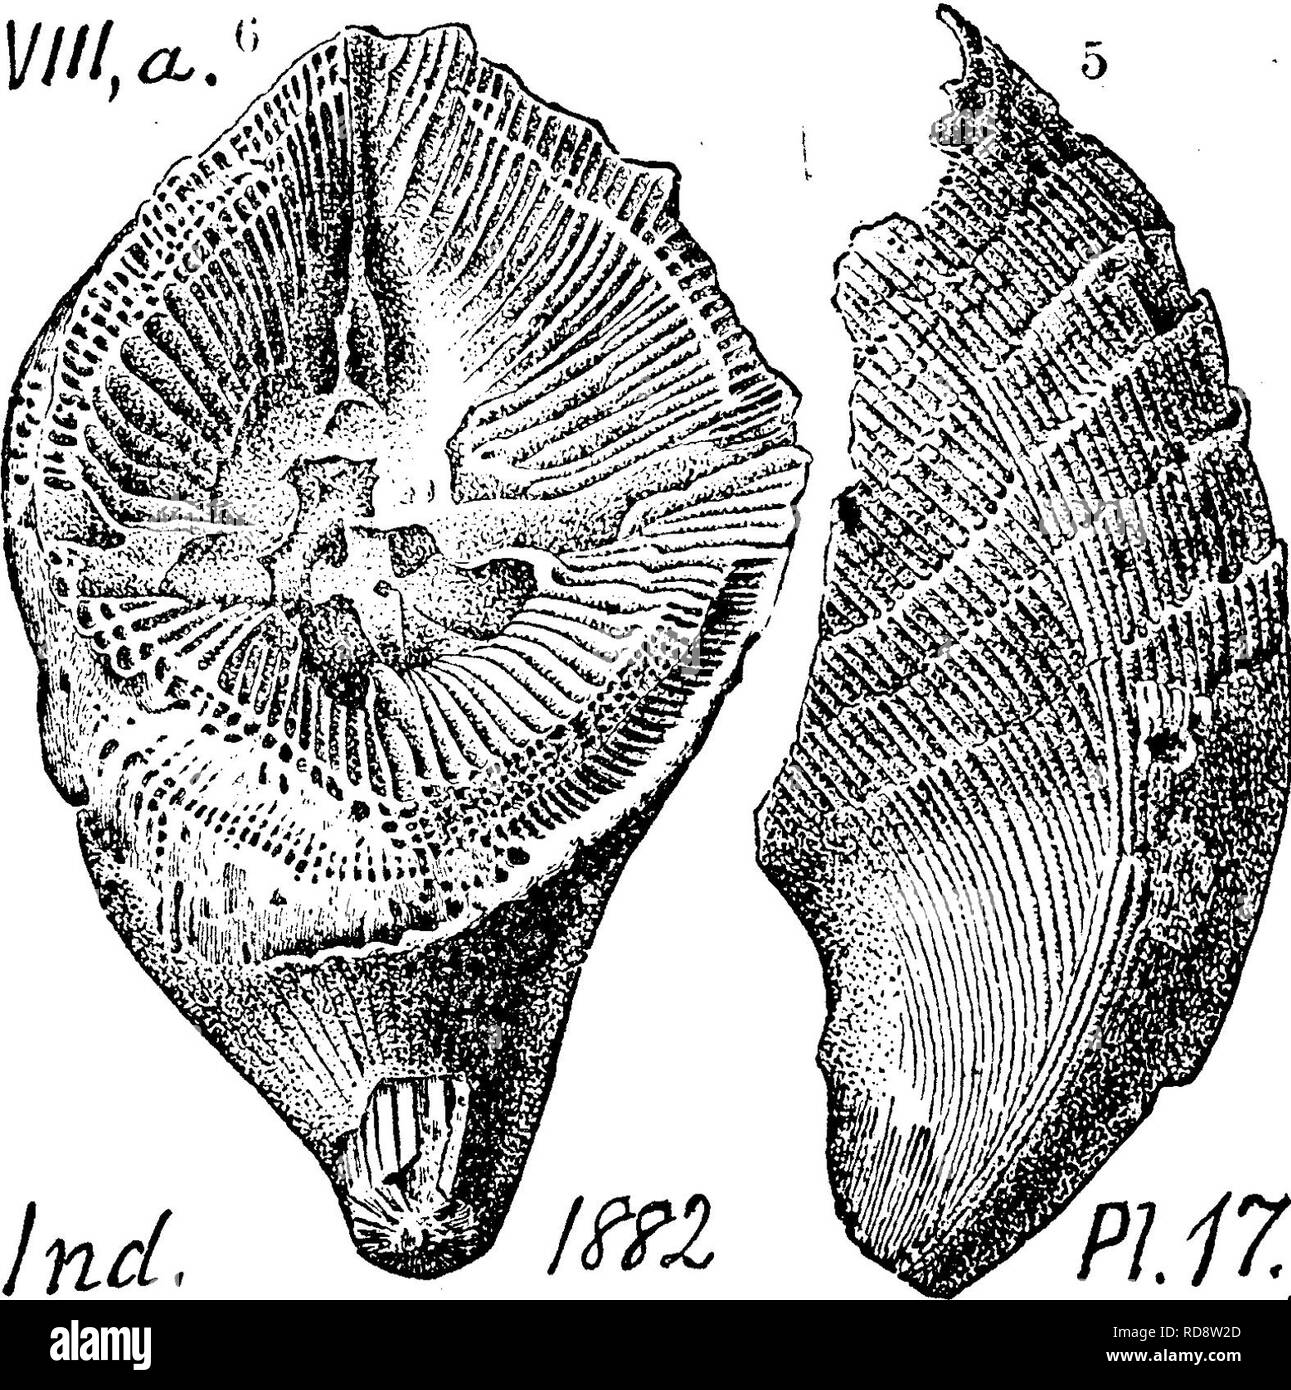 . A dictionary of the fossils of Pennsylvania and neighboring states named in the reports and catalogues of the survey ... Paleontology. 1////,^/^ ^iin, section No. 15, 200' beneath Third oil sand. (Qi,p. 250.) Vlllg. Aulacophyllum convergens. (Hall, 35th An. Rt., 1882. Fossil Corals, Niag. and V. Held.) • Oollett's Indiana of 1882, page 281, plate 17, figs. 1,2.— Villa,. Cornifer- ous limestone; Falls of the Ohio. The lamellae of this species vary from 80 to 120, alternating in size, thin tooth- pl iT.^^'-) fossette narrow, deep. Aulacophyllum cruciforme. (Hall, 35th An. Rt., 1882. Foss. Cora Stock Photo